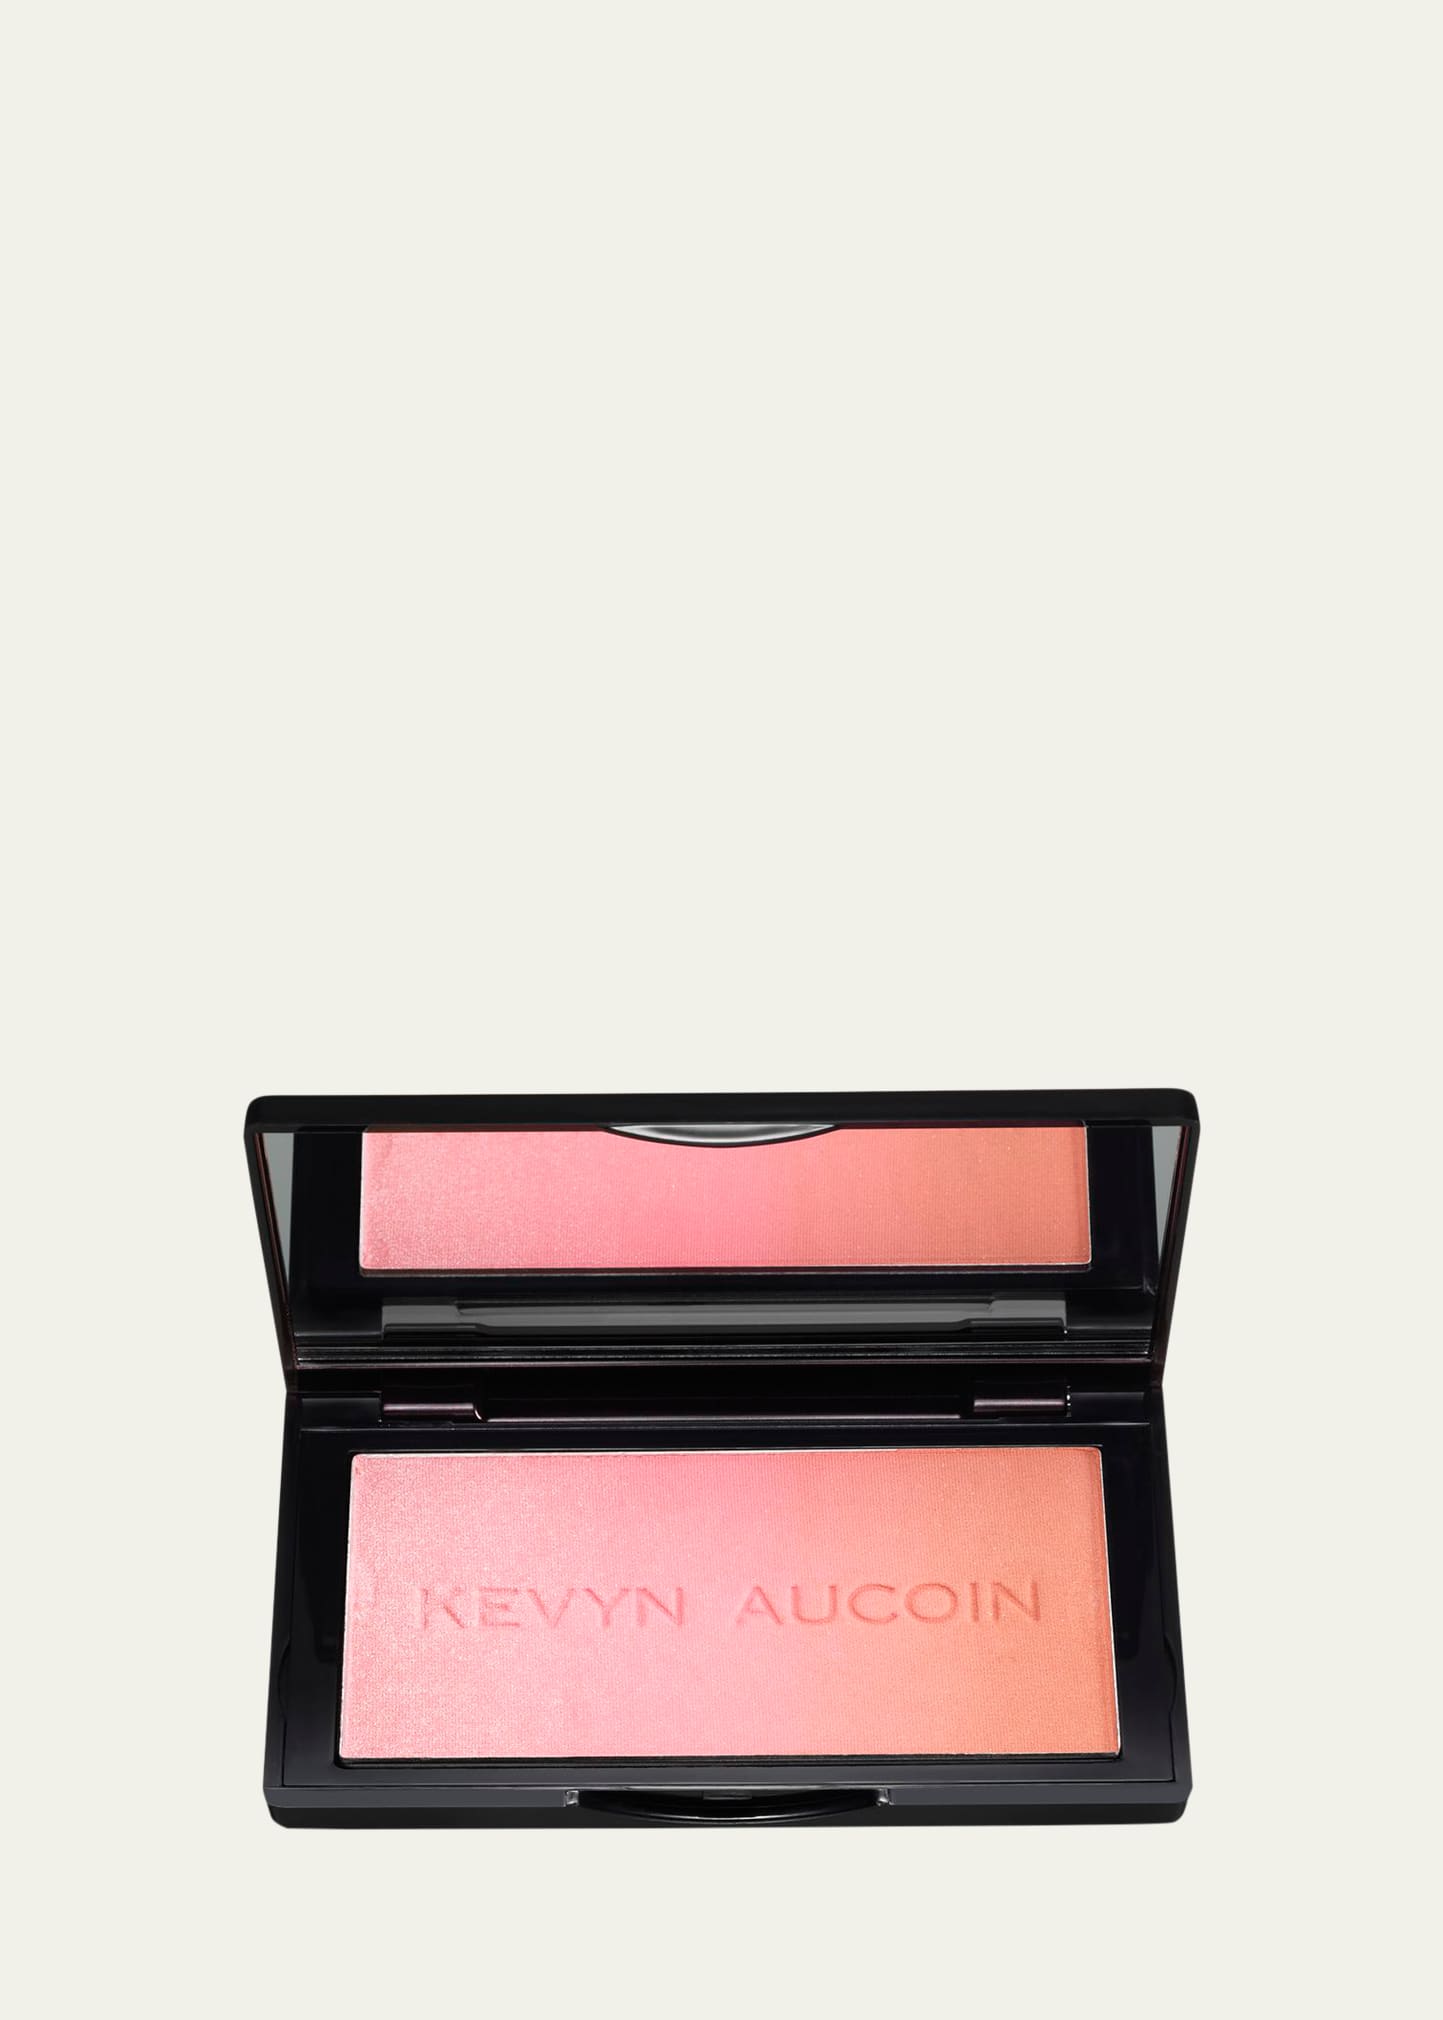 Kevyn Aucoin The Neo-blush In Pink